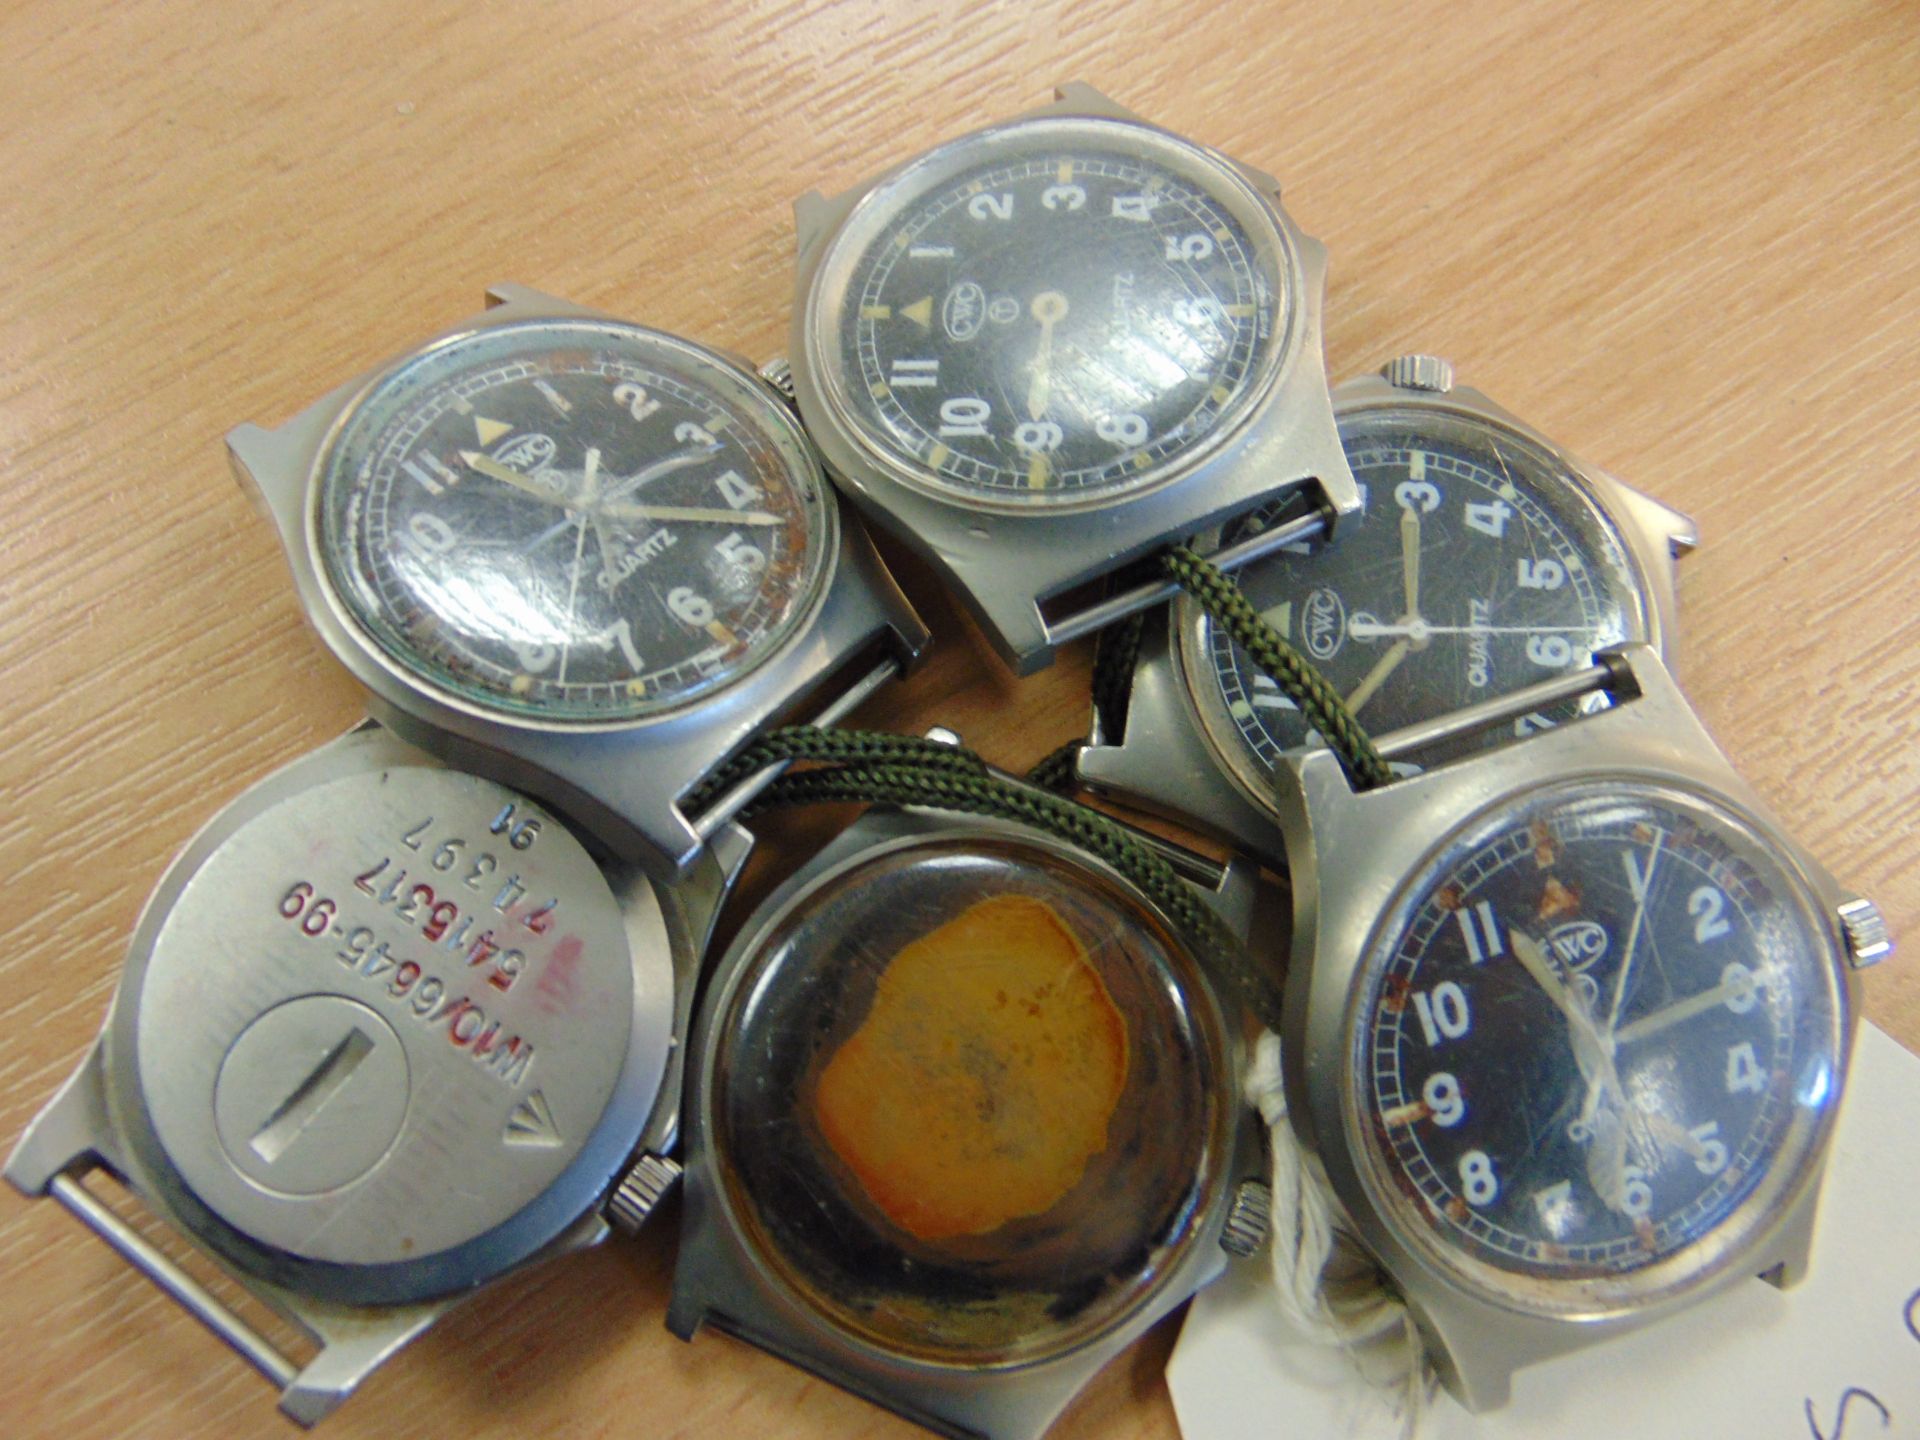 6X CWC W10 0552 SERVICES WATCHES - SPARES OR REPAIR - Image 4 of 6